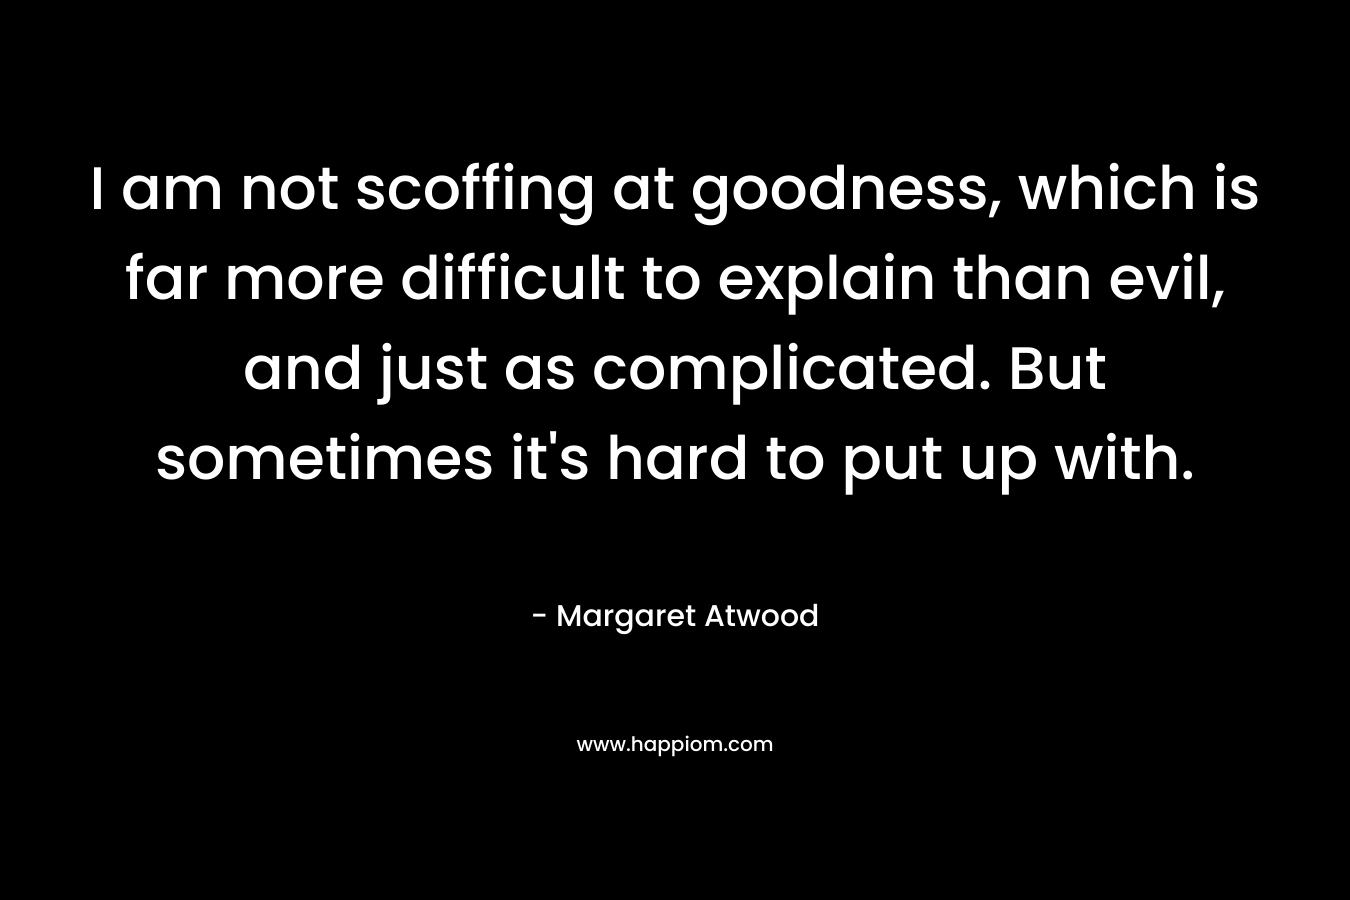 I am not scoffing at goodness, which is far more difficult to explain than evil, and just as complicated. But sometimes it's hard to put up with.